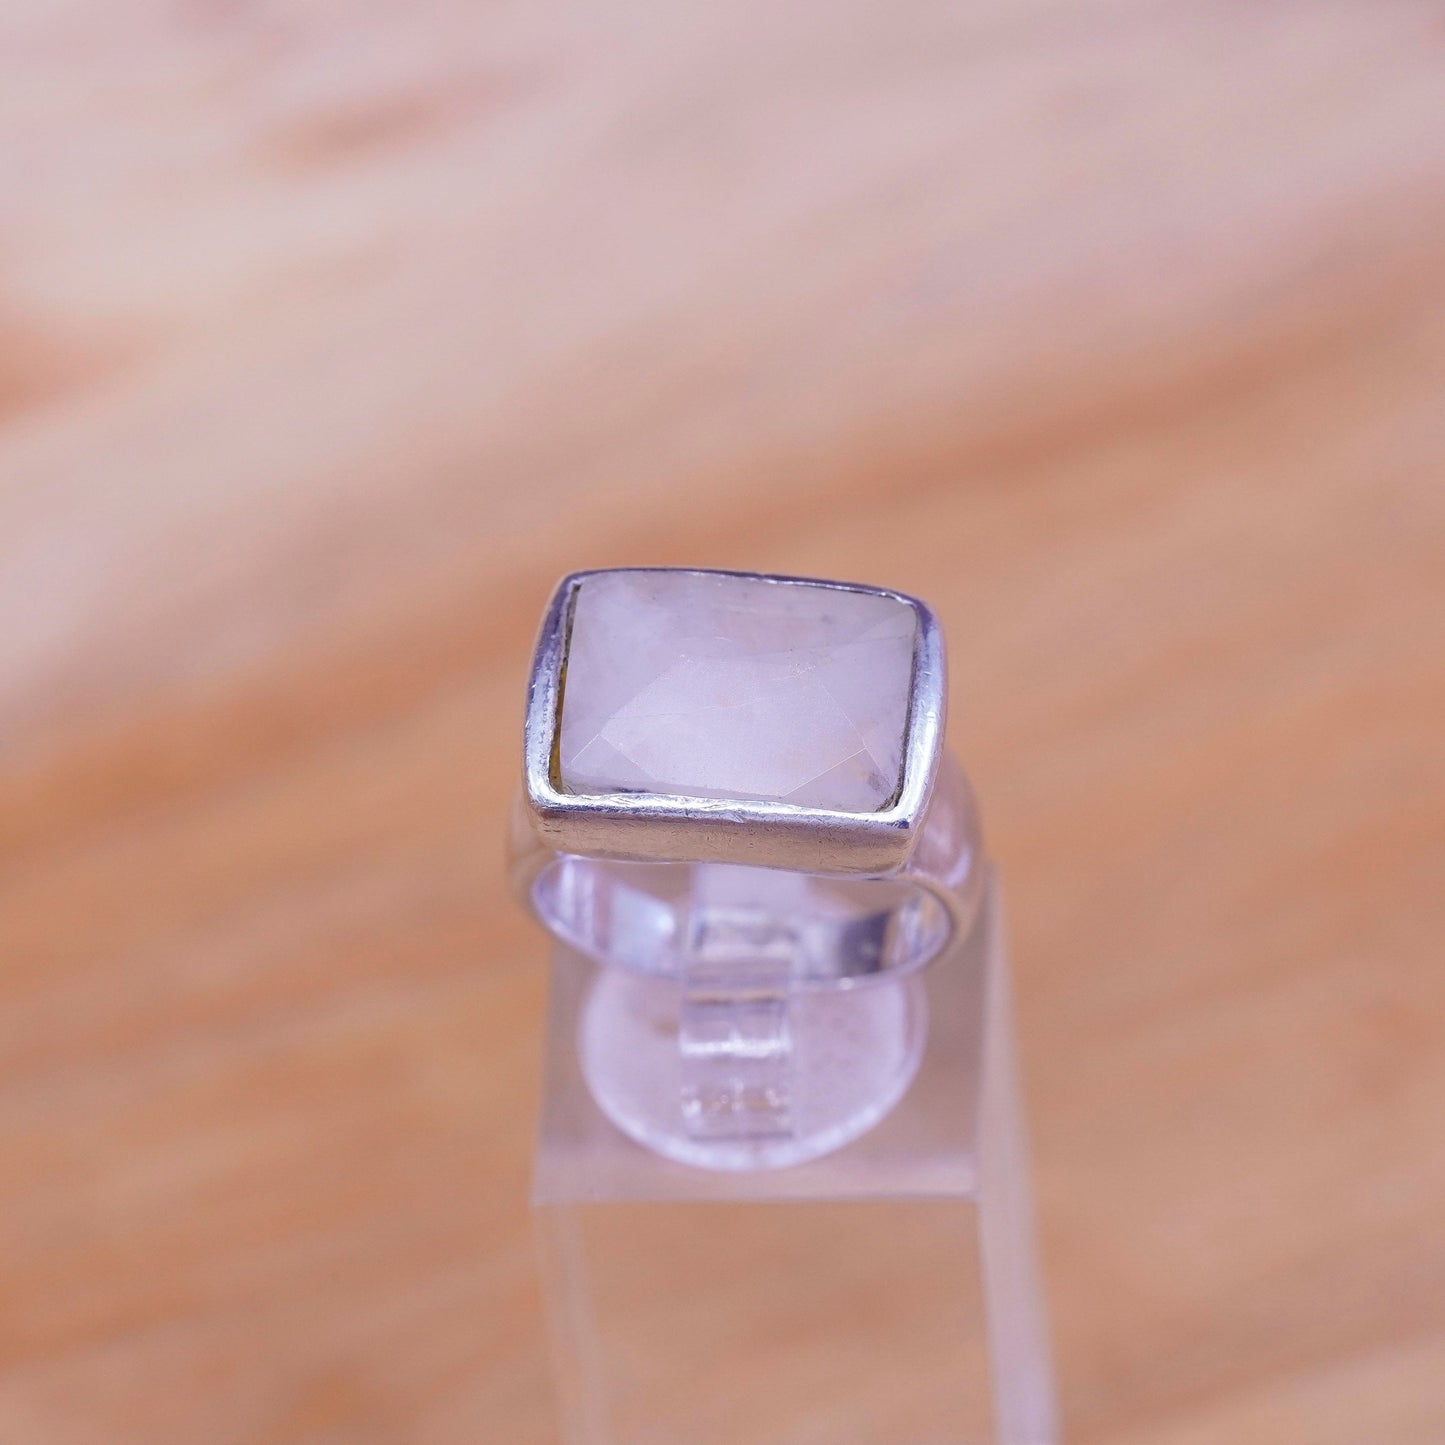 Size 7.75, vintage sterling 925 silver handmade ring with square moonstone